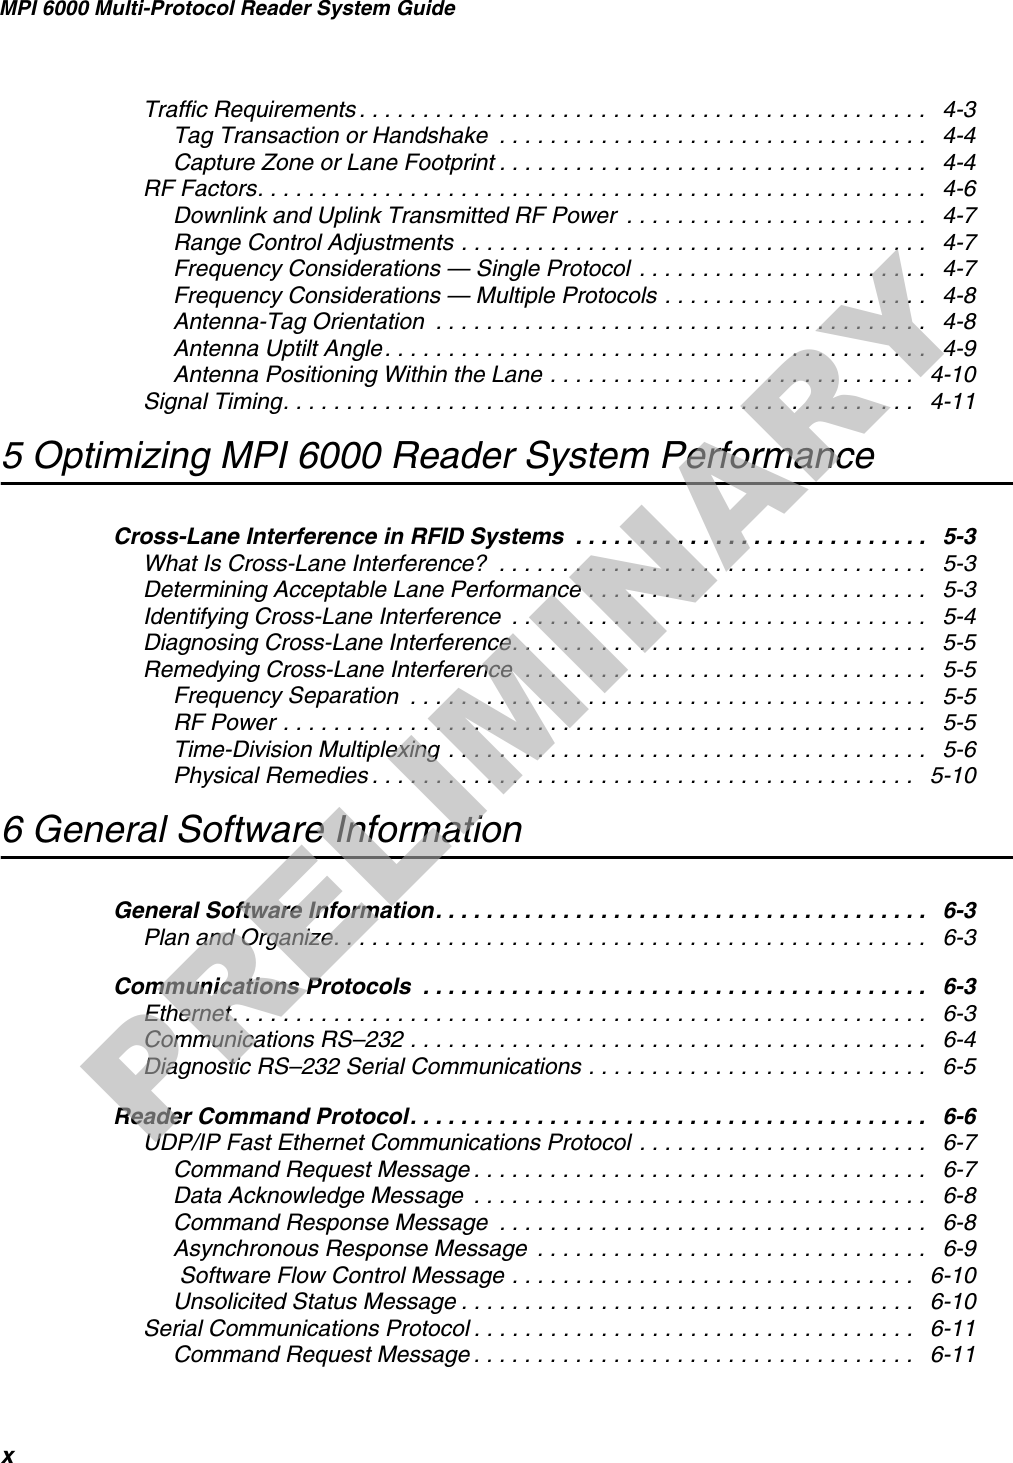 MPI 6000 Multi-Protocol Reader System GuidexTraffic Requirements . . . . . . . . . . . . . . . . . . . . . . . . . . . . . . . . . . . . . . . . . . . . .   4-3Tag Transaction or Handshake  . . . . . . . . . . . . . . . . . . . . . . . . . . . . . . . . . .   4-4Capture Zone or Lane Footprint . . . . . . . . . . . . . . . . . . . . . . . . . . . . . . . . . .   4-4RF Factors. . . . . . . . . . . . . . . . . . . . . . . . . . . . . . . . . . . . . . . . . . . . . . . . . . . . .   4-6Downlink and Uplink Transmitted RF Power  . . . . . . . . . . . . . . . . . . . . . . . .   4-7Range Control Adjustments . . . . . . . . . . . . . . . . . . . . . . . . . . . . . . . . . . . . .   4-7Frequency Considerations — Single Protocol  . . . . . . . . . . . . . . . . . . . . . . .   4-7Frequency Considerations — Multiple Protocols . . . . . . . . . . . . . . . . . . . . .   4-8Antenna-Tag Orientation  . . . . . . . . . . . . . . . . . . . . . . . . . . . . . . . . . . . . . . .   4-8Antenna Uptilt Angle. . . . . . . . . . . . . . . . . . . . . . . . . . . . . . . . . . . . . . . . . . .   4-9Antenna Positioning Within the Lane . . . . . . . . . . . . . . . . . . . . . . . . . . . . .   4-10Signal Timing. . . . . . . . . . . . . . . . . . . . . . . . . . . . . . . . . . . . . . . . . . . . . . . . . .   4-115 Optimizing MPI 6000 Reader System PerformanceCross-Lane Interference in RFID Systems  . . . . . . . . . . . . . . . . . . . . . . . . . . . .   5-3What Is Cross-Lane Interference?  . . . . . . . . . . . . . . . . . . . . . . . . . . . . . . . . . .   5-3Determining Acceptable Lane Performance . . . . . . . . . . . . . . . . . . . . . . . . . . .   5-3Identifying Cross-Lane Interference  . . . . . . . . . . . . . . . . . . . . . . . . . . . . . . . . .   5-4Diagnosing Cross-Lane Interference. . . . . . . . . . . . . . . . . . . . . . . . . . . . . . . . .   5-5Remedying Cross-Lane Interference  . . . . . . . . . . . . . . . . . . . . . . . . . . . . . . . .   5-5Frequency Separation  . . . . . . . . . . . . . . . . . . . . . . . . . . . . . . . . . . . . . . . . .   5-5RF Power . . . . . . . . . . . . . . . . . . . . . . . . . . . . . . . . . . . . . . . . . . . . . . . . . . .   5-5Time-Division Multiplexing  . . . . . . . . . . . . . . . . . . . . . . . . . . . . . . . . . . . . . .   5-6Physical Remedies . . . . . . . . . . . . . . . . . . . . . . . . . . . . . . . . . . . . . . . . . . .   5-106 General Software InformationGeneral Software Information. . . . . . . . . . . . . . . . . . . . . . . . . . . . . . . . . . . . . . .   6-3Plan and Organize. . . . . . . . . . . . . . . . . . . . . . . . . . . . . . . . . . . . . . . . . . . . . . .   6-3Communications Protocols  . . . . . . . . . . . . . . . . . . . . . . . . . . . . . . . . . . . . . . . .   6-3Ethernet. . . . . . . . . . . . . . . . . . . . . . . . . . . . . . . . . . . . . . . . . . . . . . . . . . . . . . .   6-3Communications RS–232 . . . . . . . . . . . . . . . . . . . . . . . . . . . . . . . . . . . . . . . . .   6-4Diagnostic RS–232 Serial Communications . . . . . . . . . . . . . . . . . . . . . . . . . . .   6-5Reader Command Protocol. . . . . . . . . . . . . . . . . . . . . . . . . . . . . . . . . . . . . . . . .   6-6UDP/IP Fast Ethernet Communications Protocol . . . . . . . . . . . . . . . . . . . . . . .   6-7Command Request Message . . . . . . . . . . . . . . . . . . . . . . . . . . . . . . . . . . . .   6-7Data Acknowledge Message  . . . . . . . . . . . . . . . . . . . . . . . . . . . . . . . . . . . .   6-8Command Response Message  . . . . . . . . . . . . . . . . . . . . . . . . . . . . . . . . . .   6-8Asynchronous Response Message  . . . . . . . . . . . . . . . . . . . . . . . . . . . . . . .   6-9 Software Flow Control Message . . . . . . . . . . . . . . . . . . . . . . . . . . . . . . . .   6-10Unsolicited Status Message . . . . . . . . . . . . . . . . . . . . . . . . . . . . . . . . . . . .   6-10Serial Communications Protocol . . . . . . . . . . . . . . . . . . . . . . . . . . . . . . . . . . .   6-11Command Request Message . . . . . . . . . . . . . . . . . . . . . . . . . . . . . . . . . . .   6-11PRELIMINARY